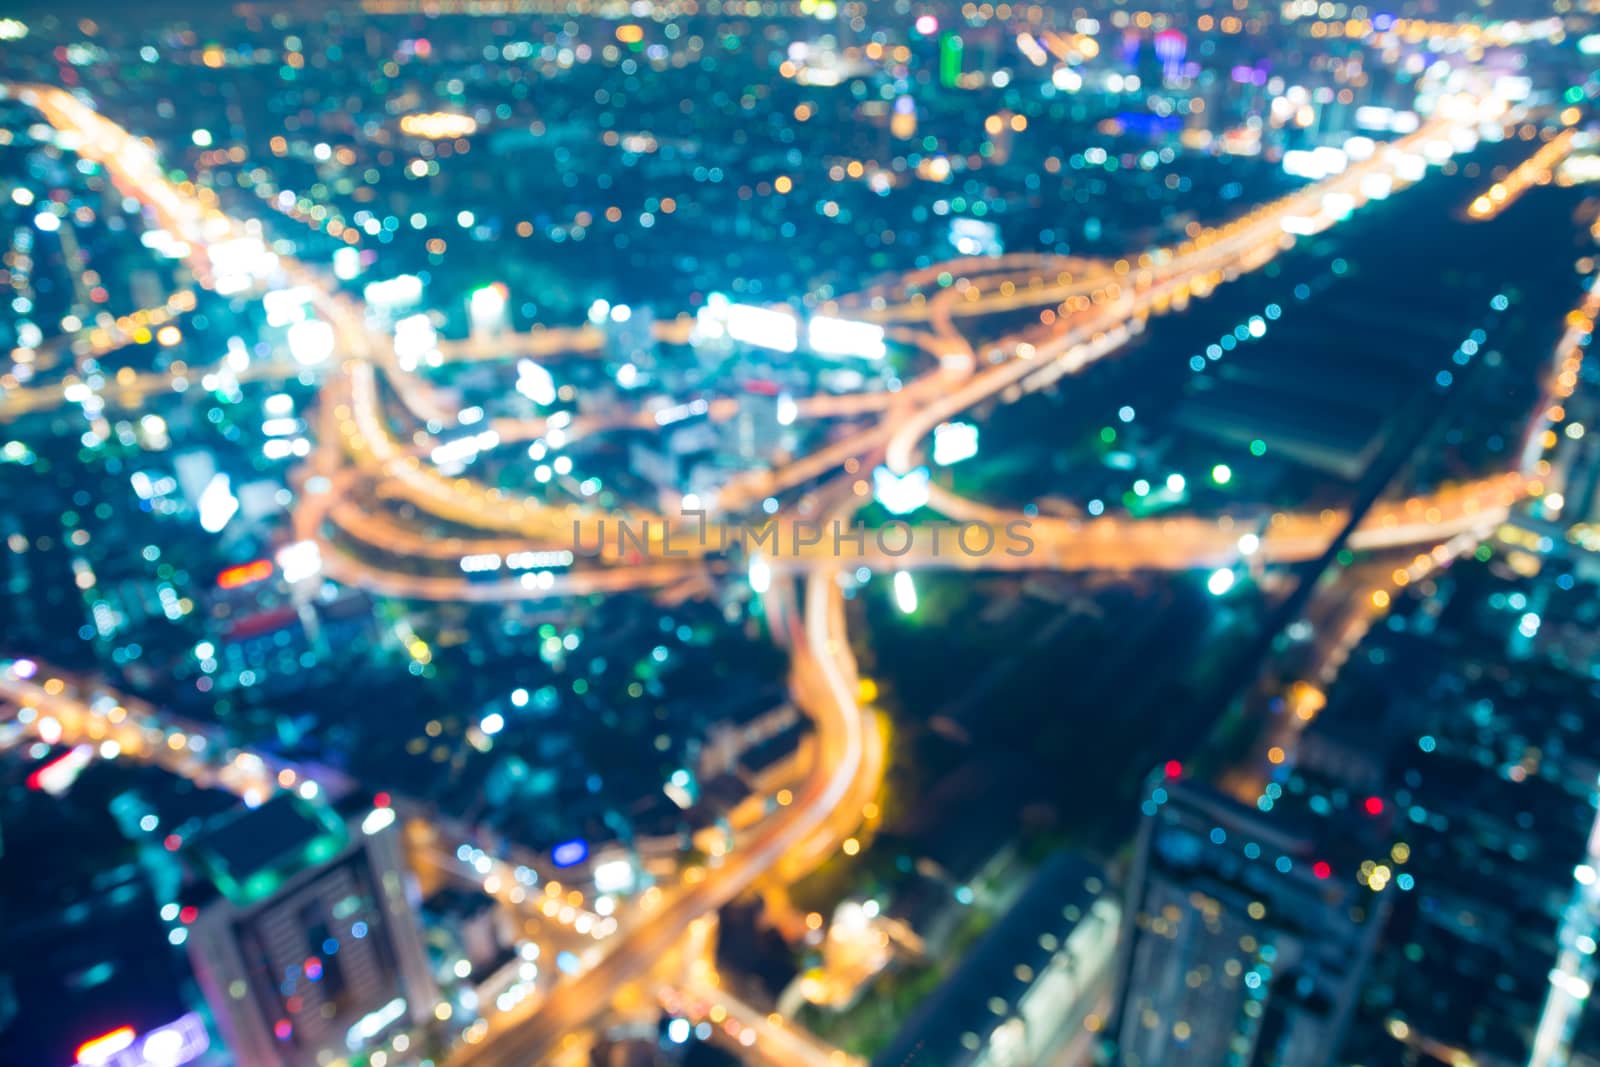 Blur or Defocus Background of Bangkok Express way at Night or Tw by thampapon